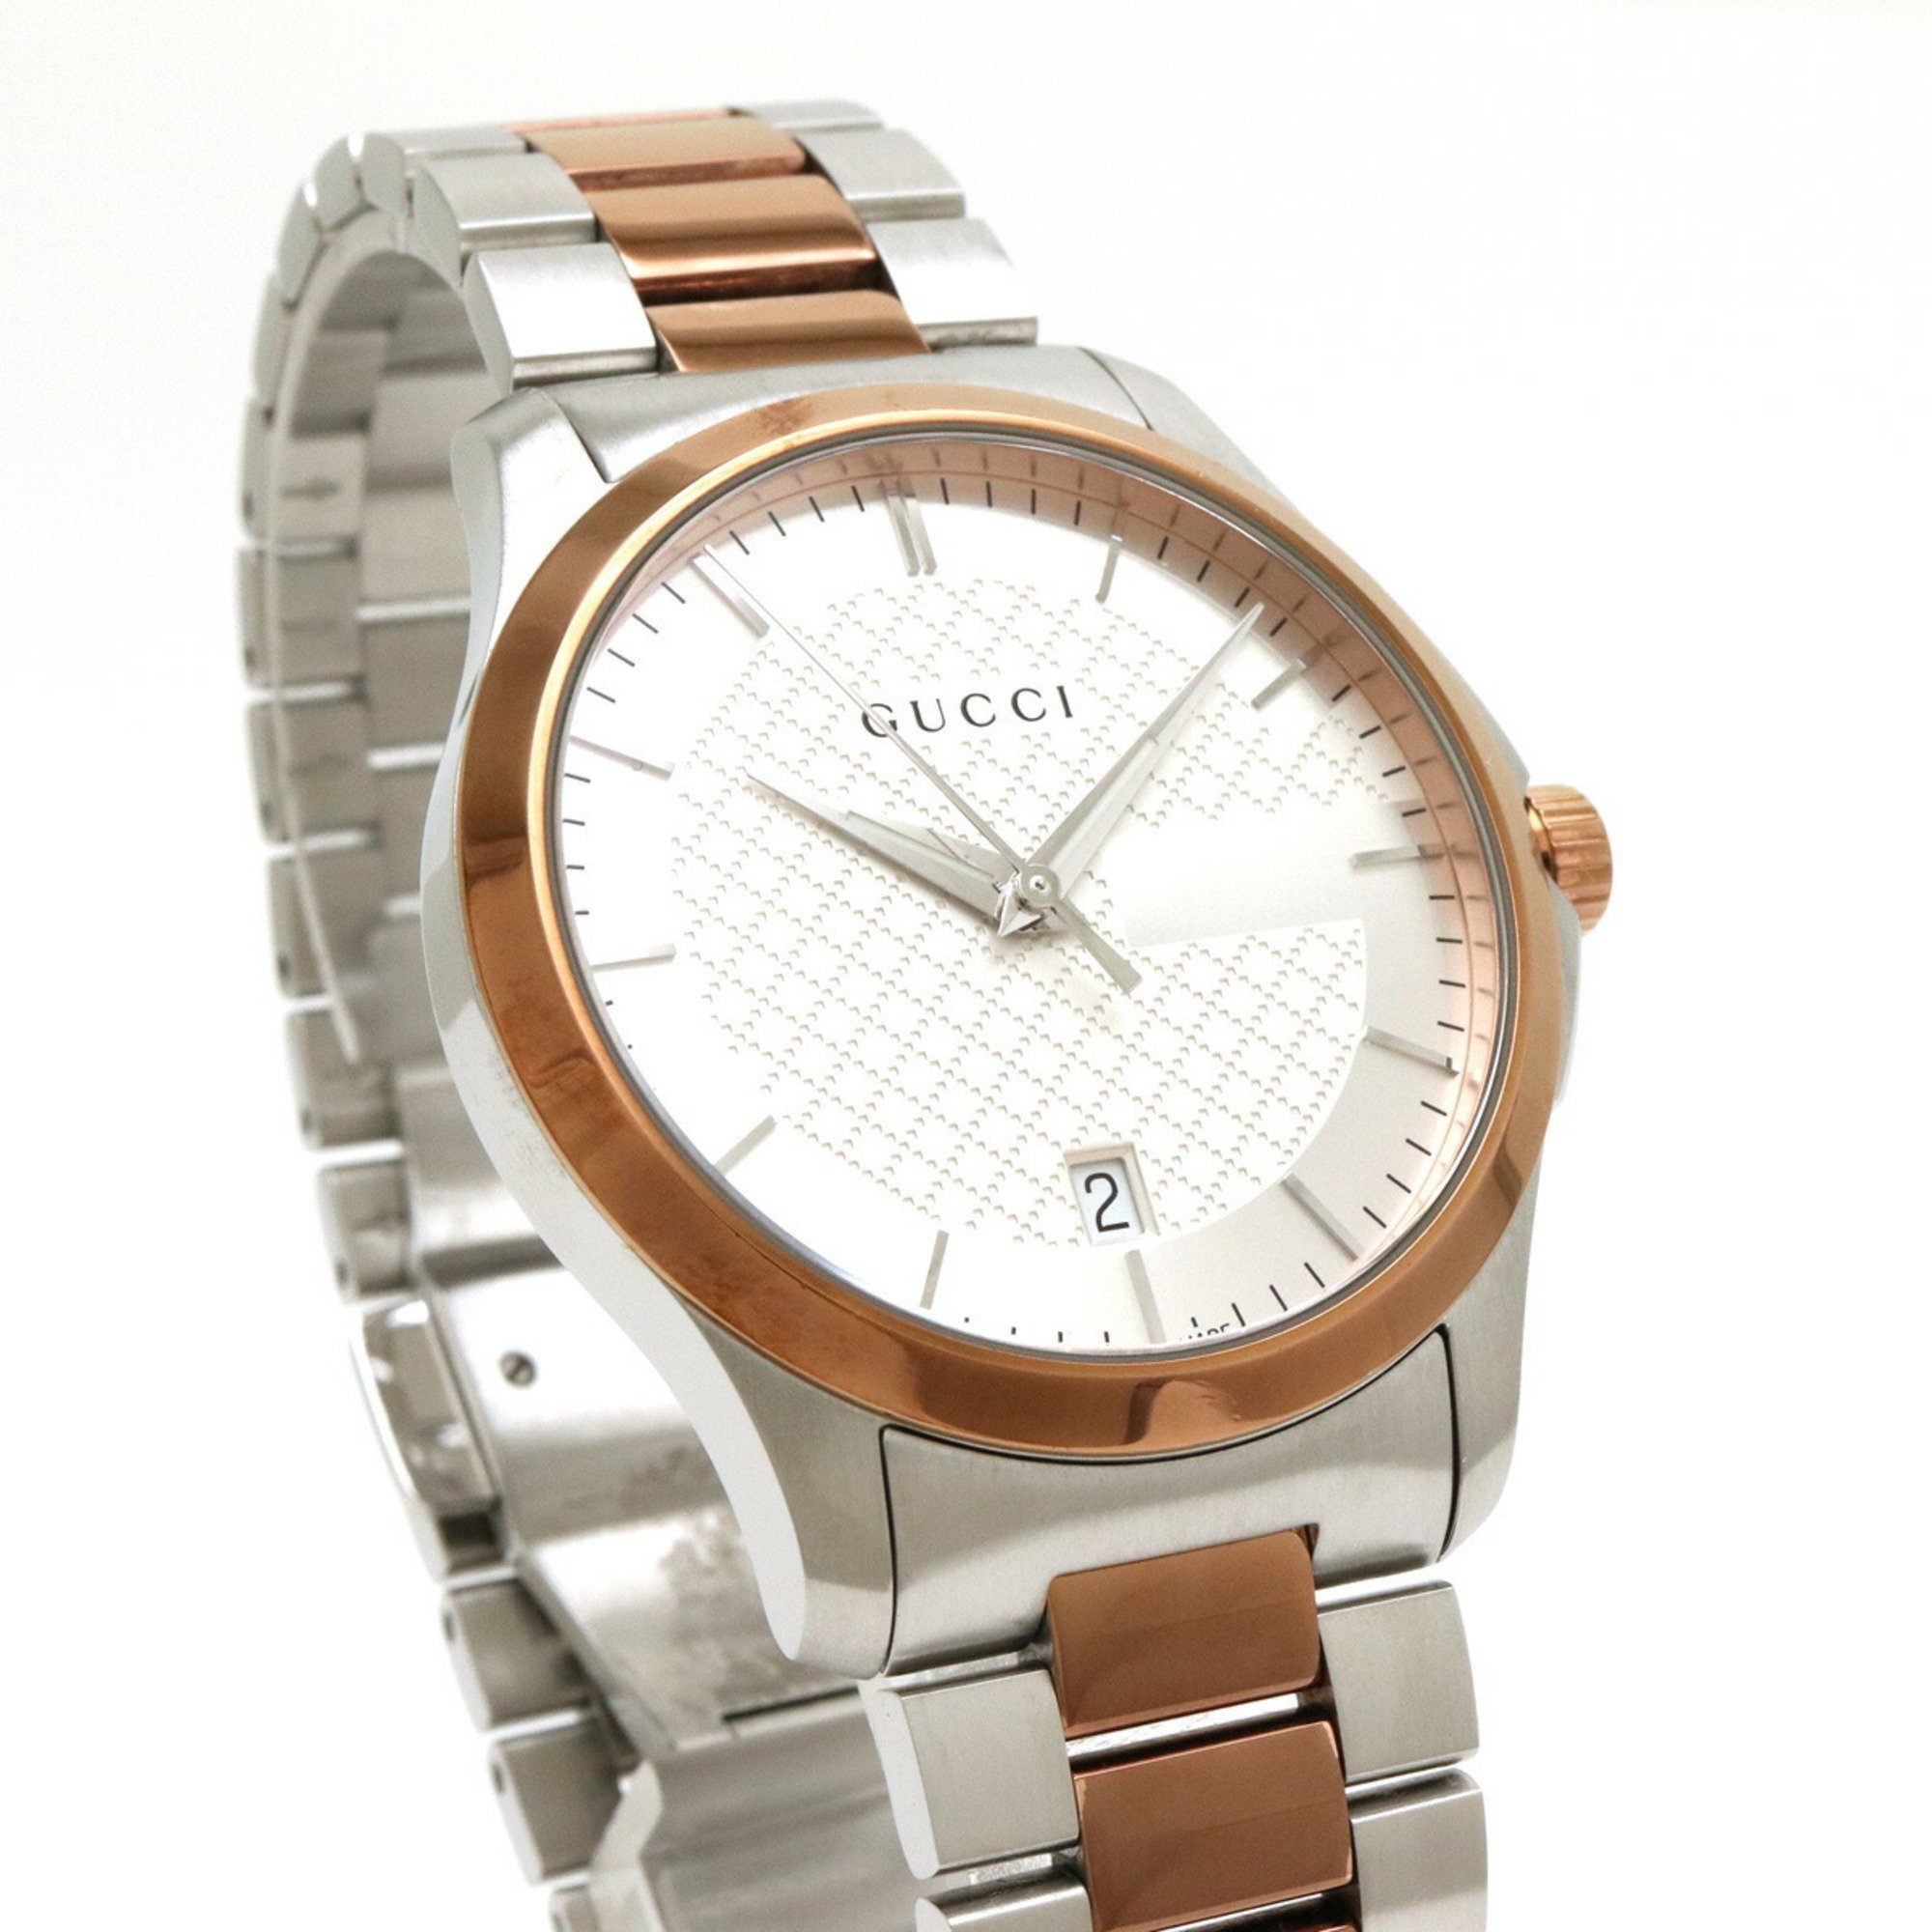 GUCCI G Timeless Collection Date SS PGPVD Silver Dial Men's Quartz Watch YA126447 126.4